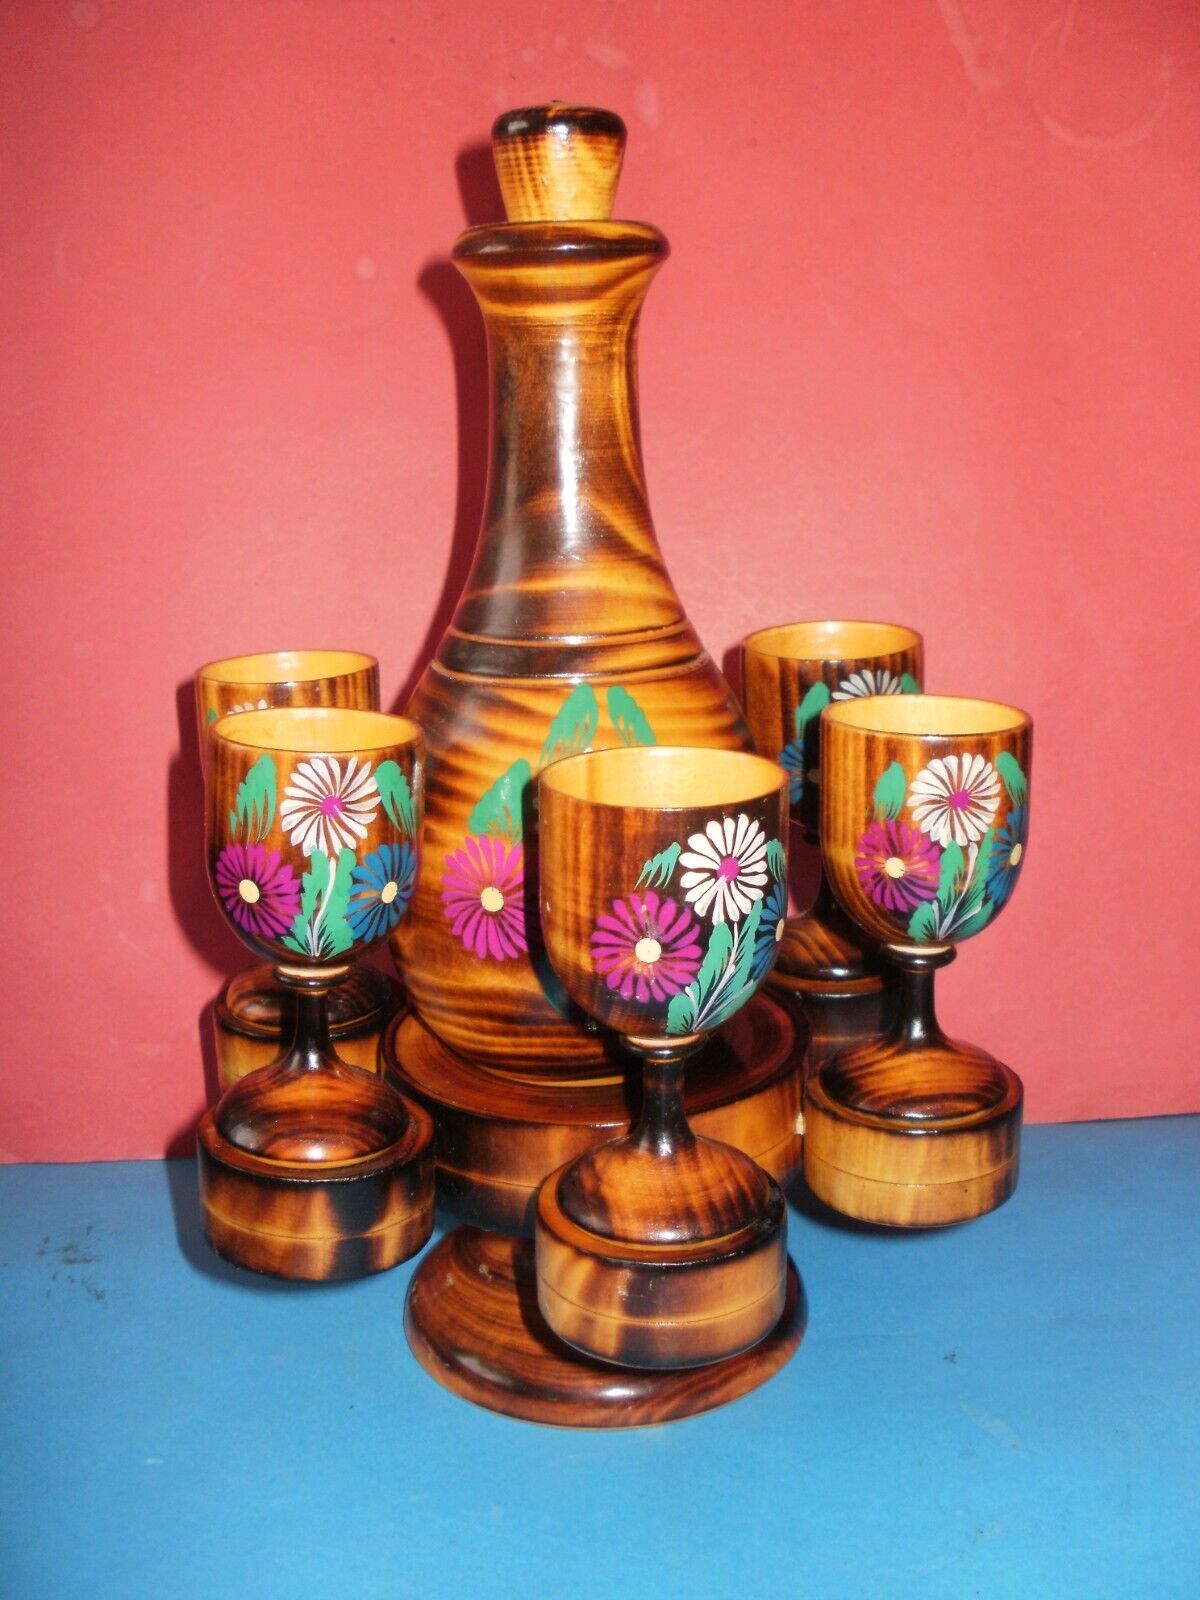 Magnificent Russian hand painted ethnic wooden drink set, a bottle and 6 glasses